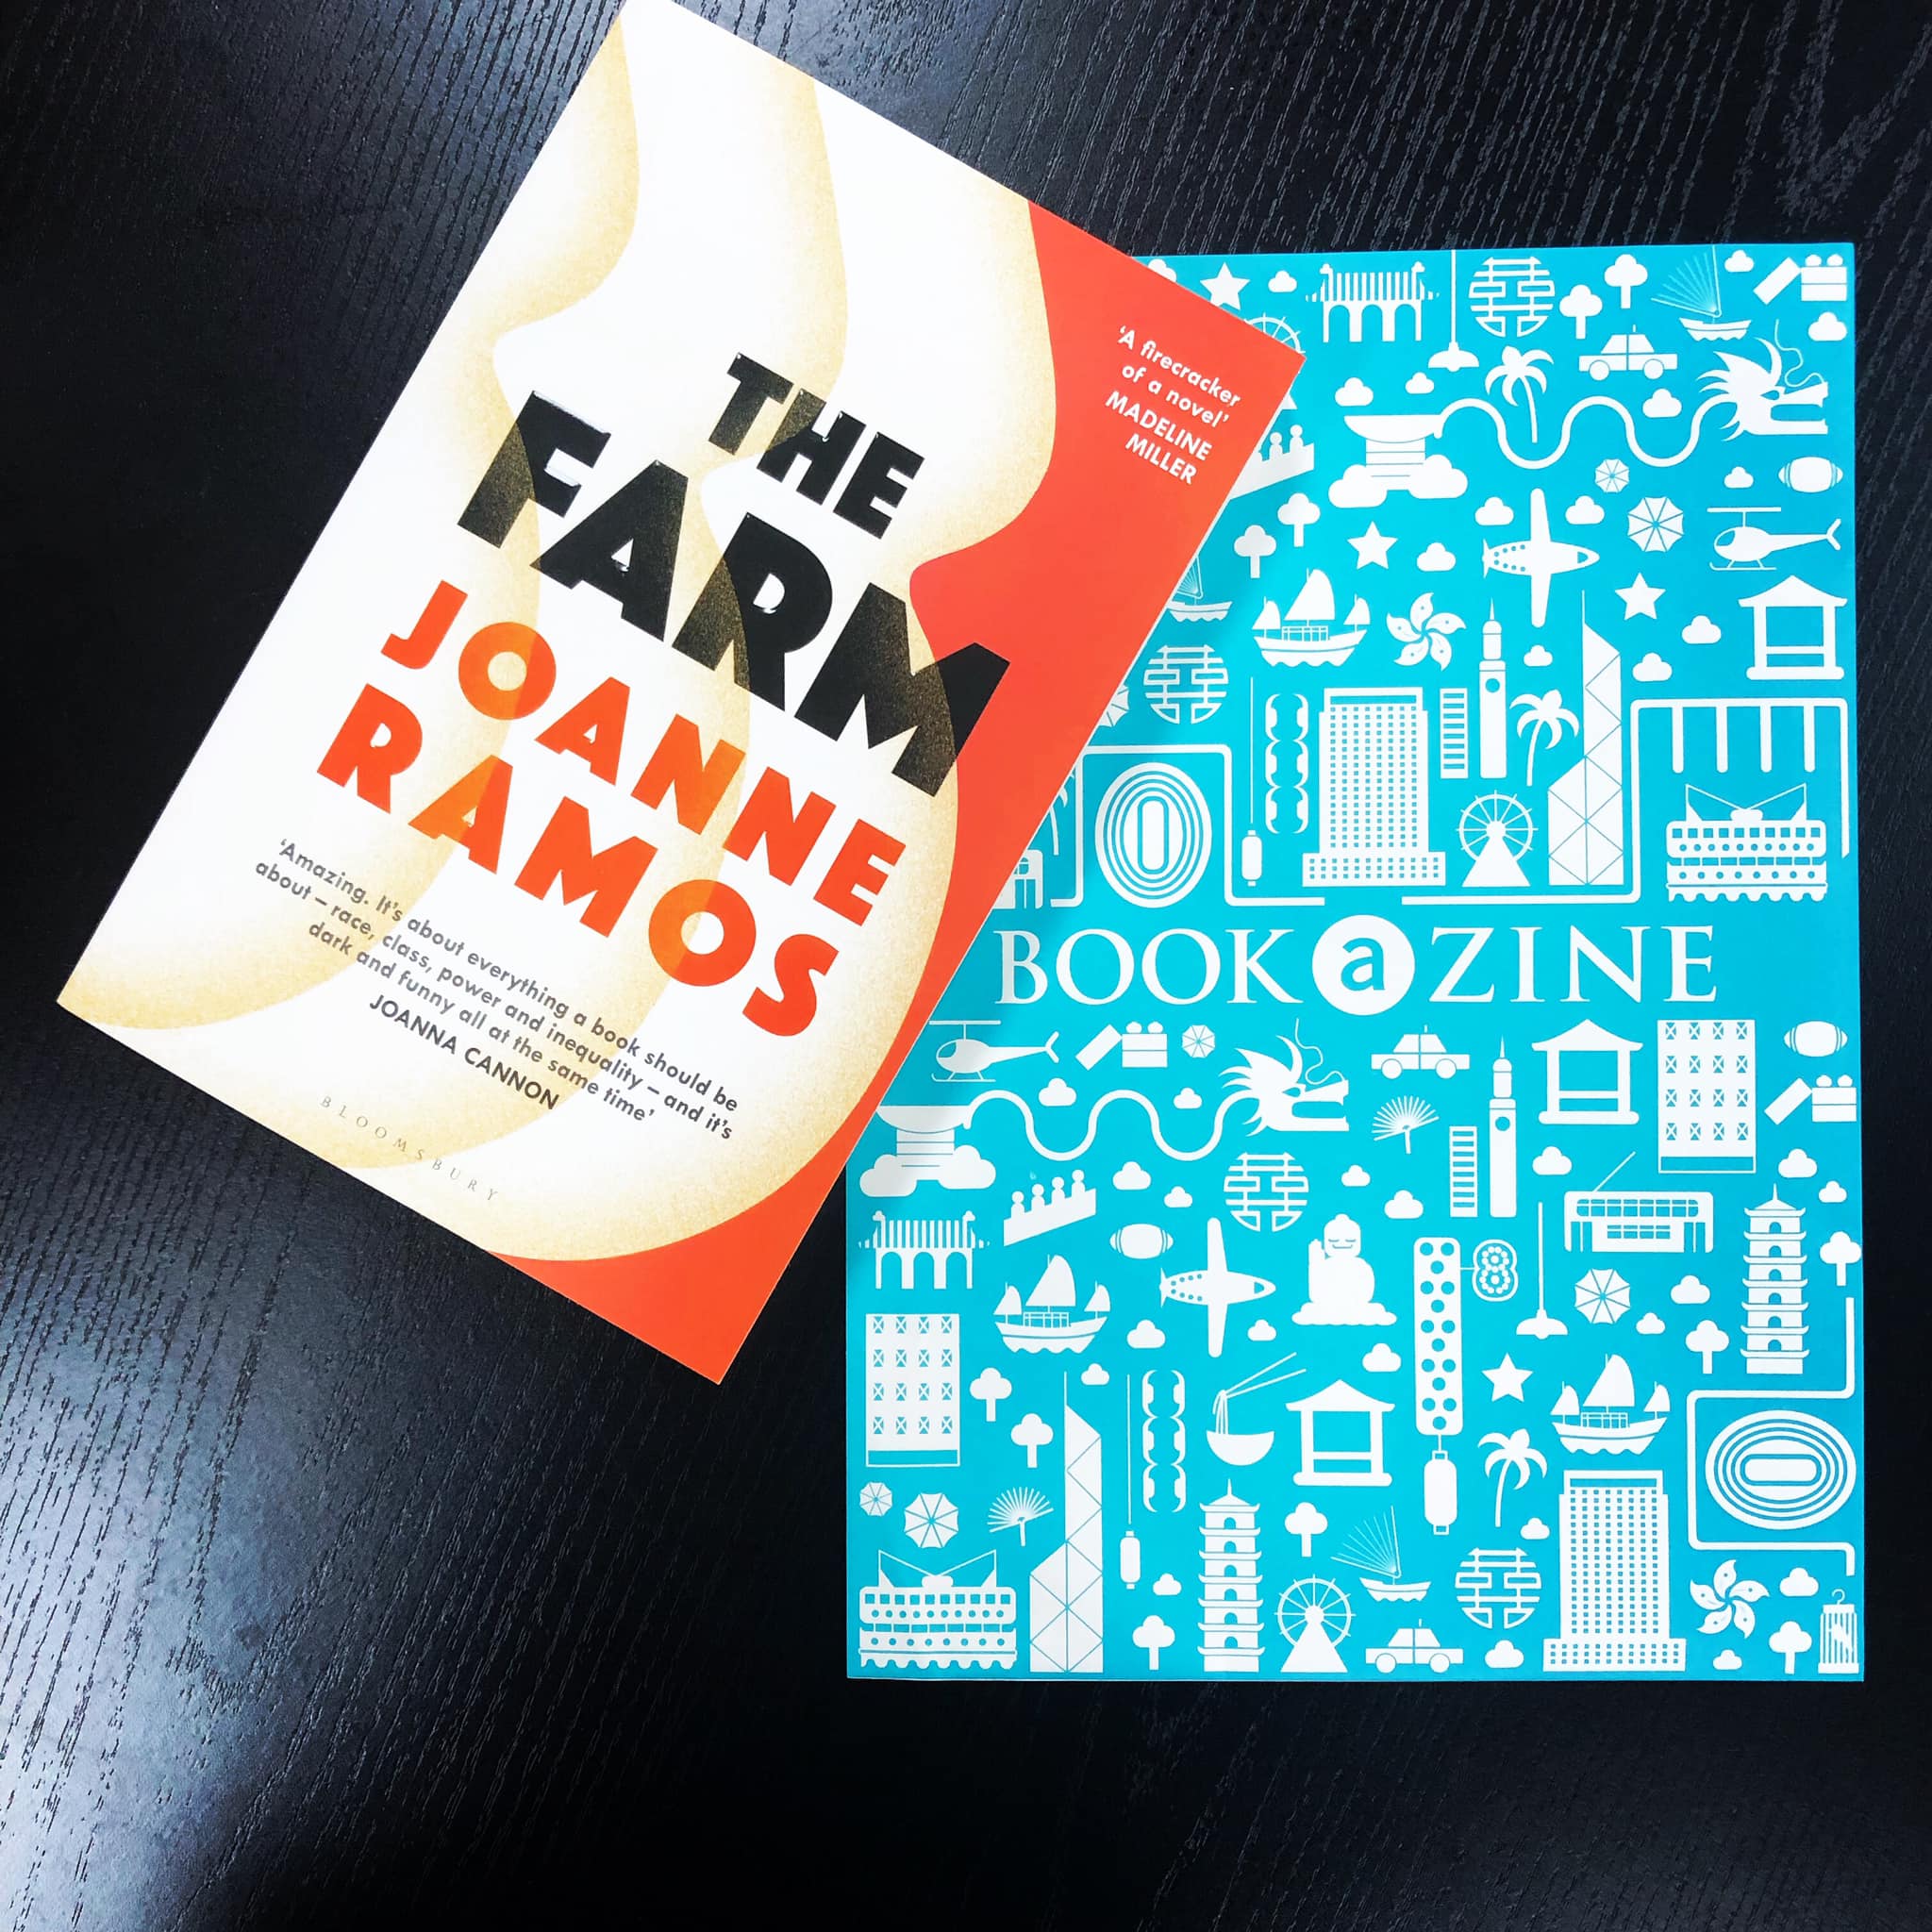 Look what has just hit our stores! Joanne Ramos’ debut novel “The Farm” has been praised by the New York Times, Time Magazine, People Magazine, O Magazine, and it is a BBC Radio 2 Pick. Add it to your Summer to-read pile now! 📚